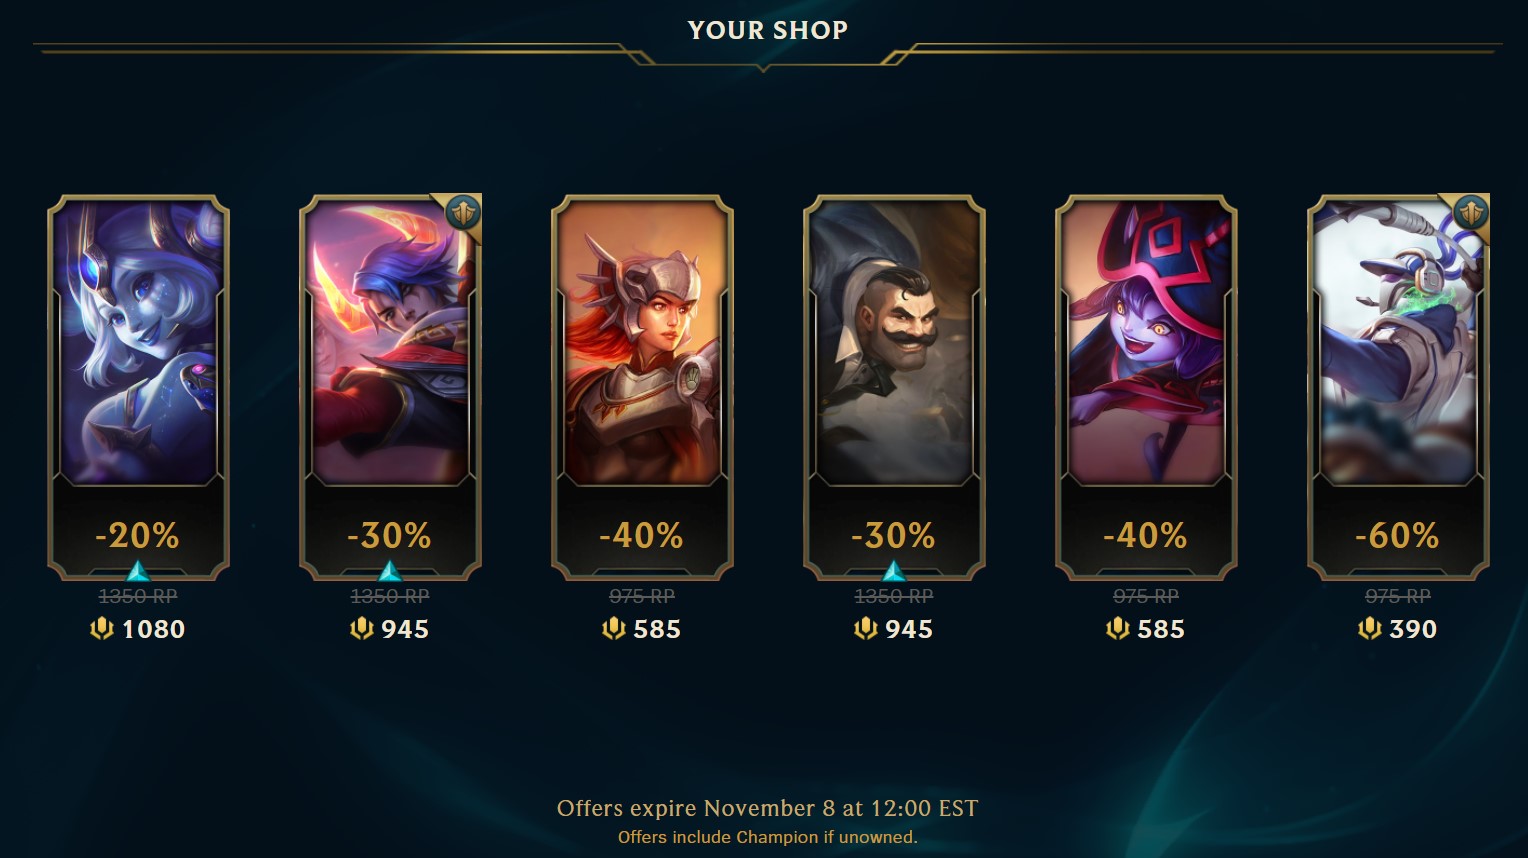 Private market returns to League of Legends